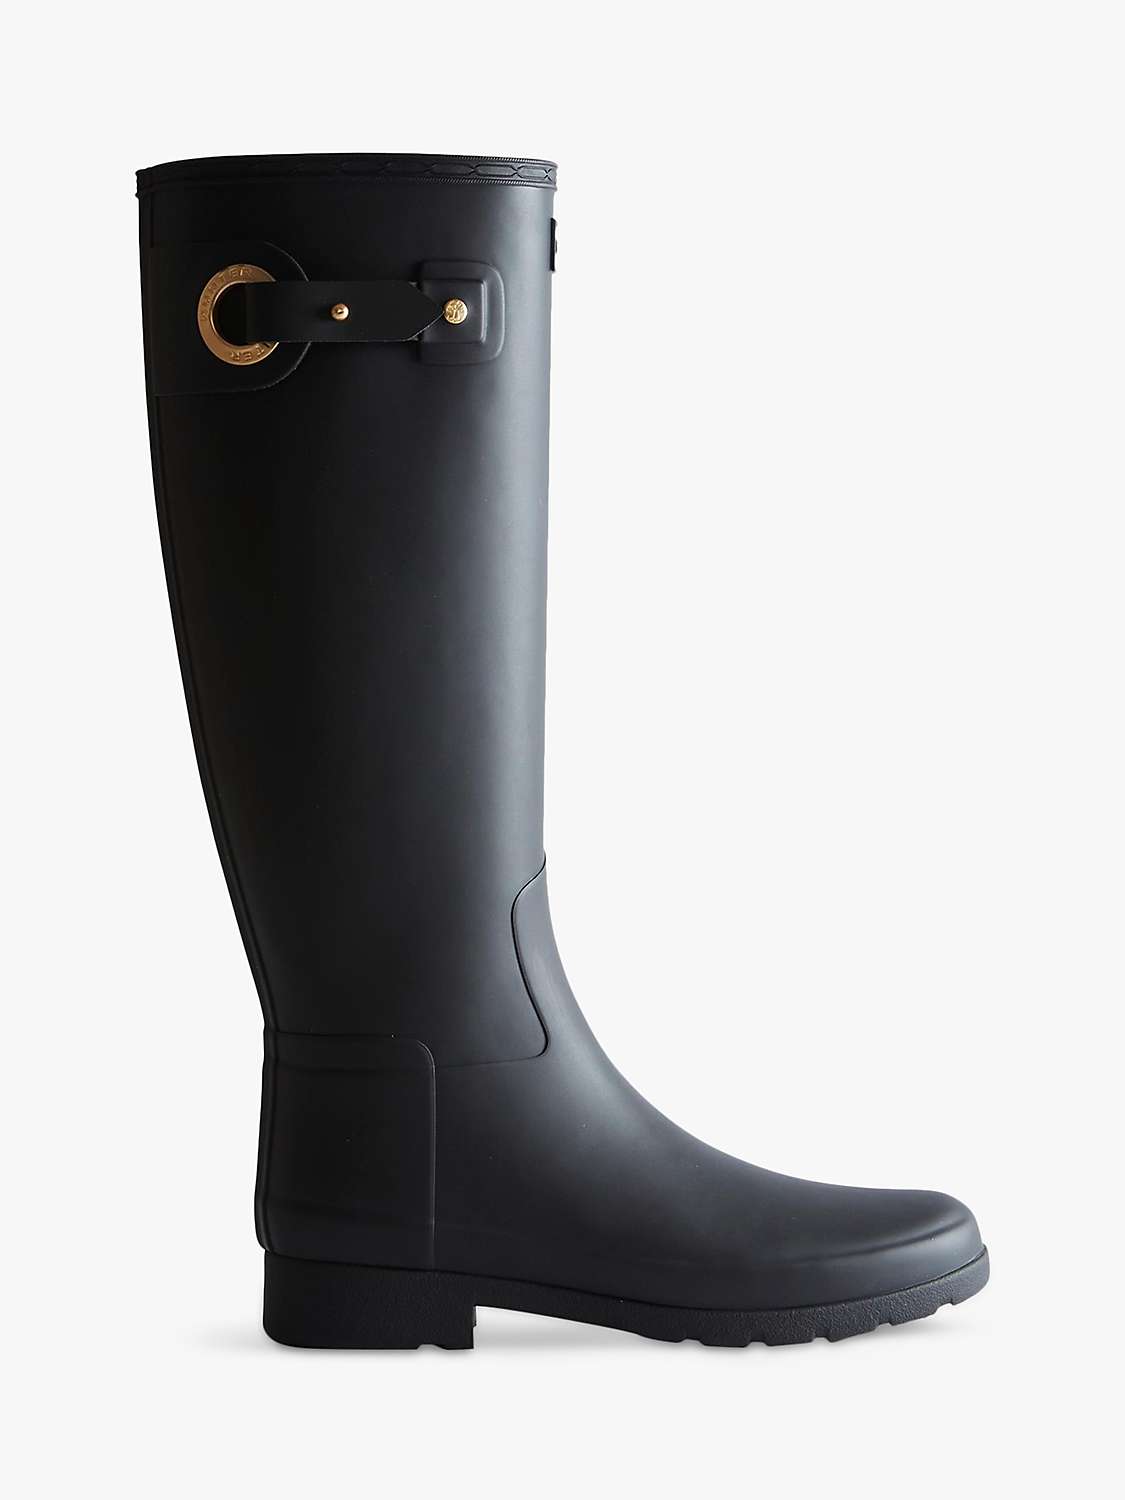 Hunter Refined Tall Buckle Wellington Boots, Black at John Lewis & Partners